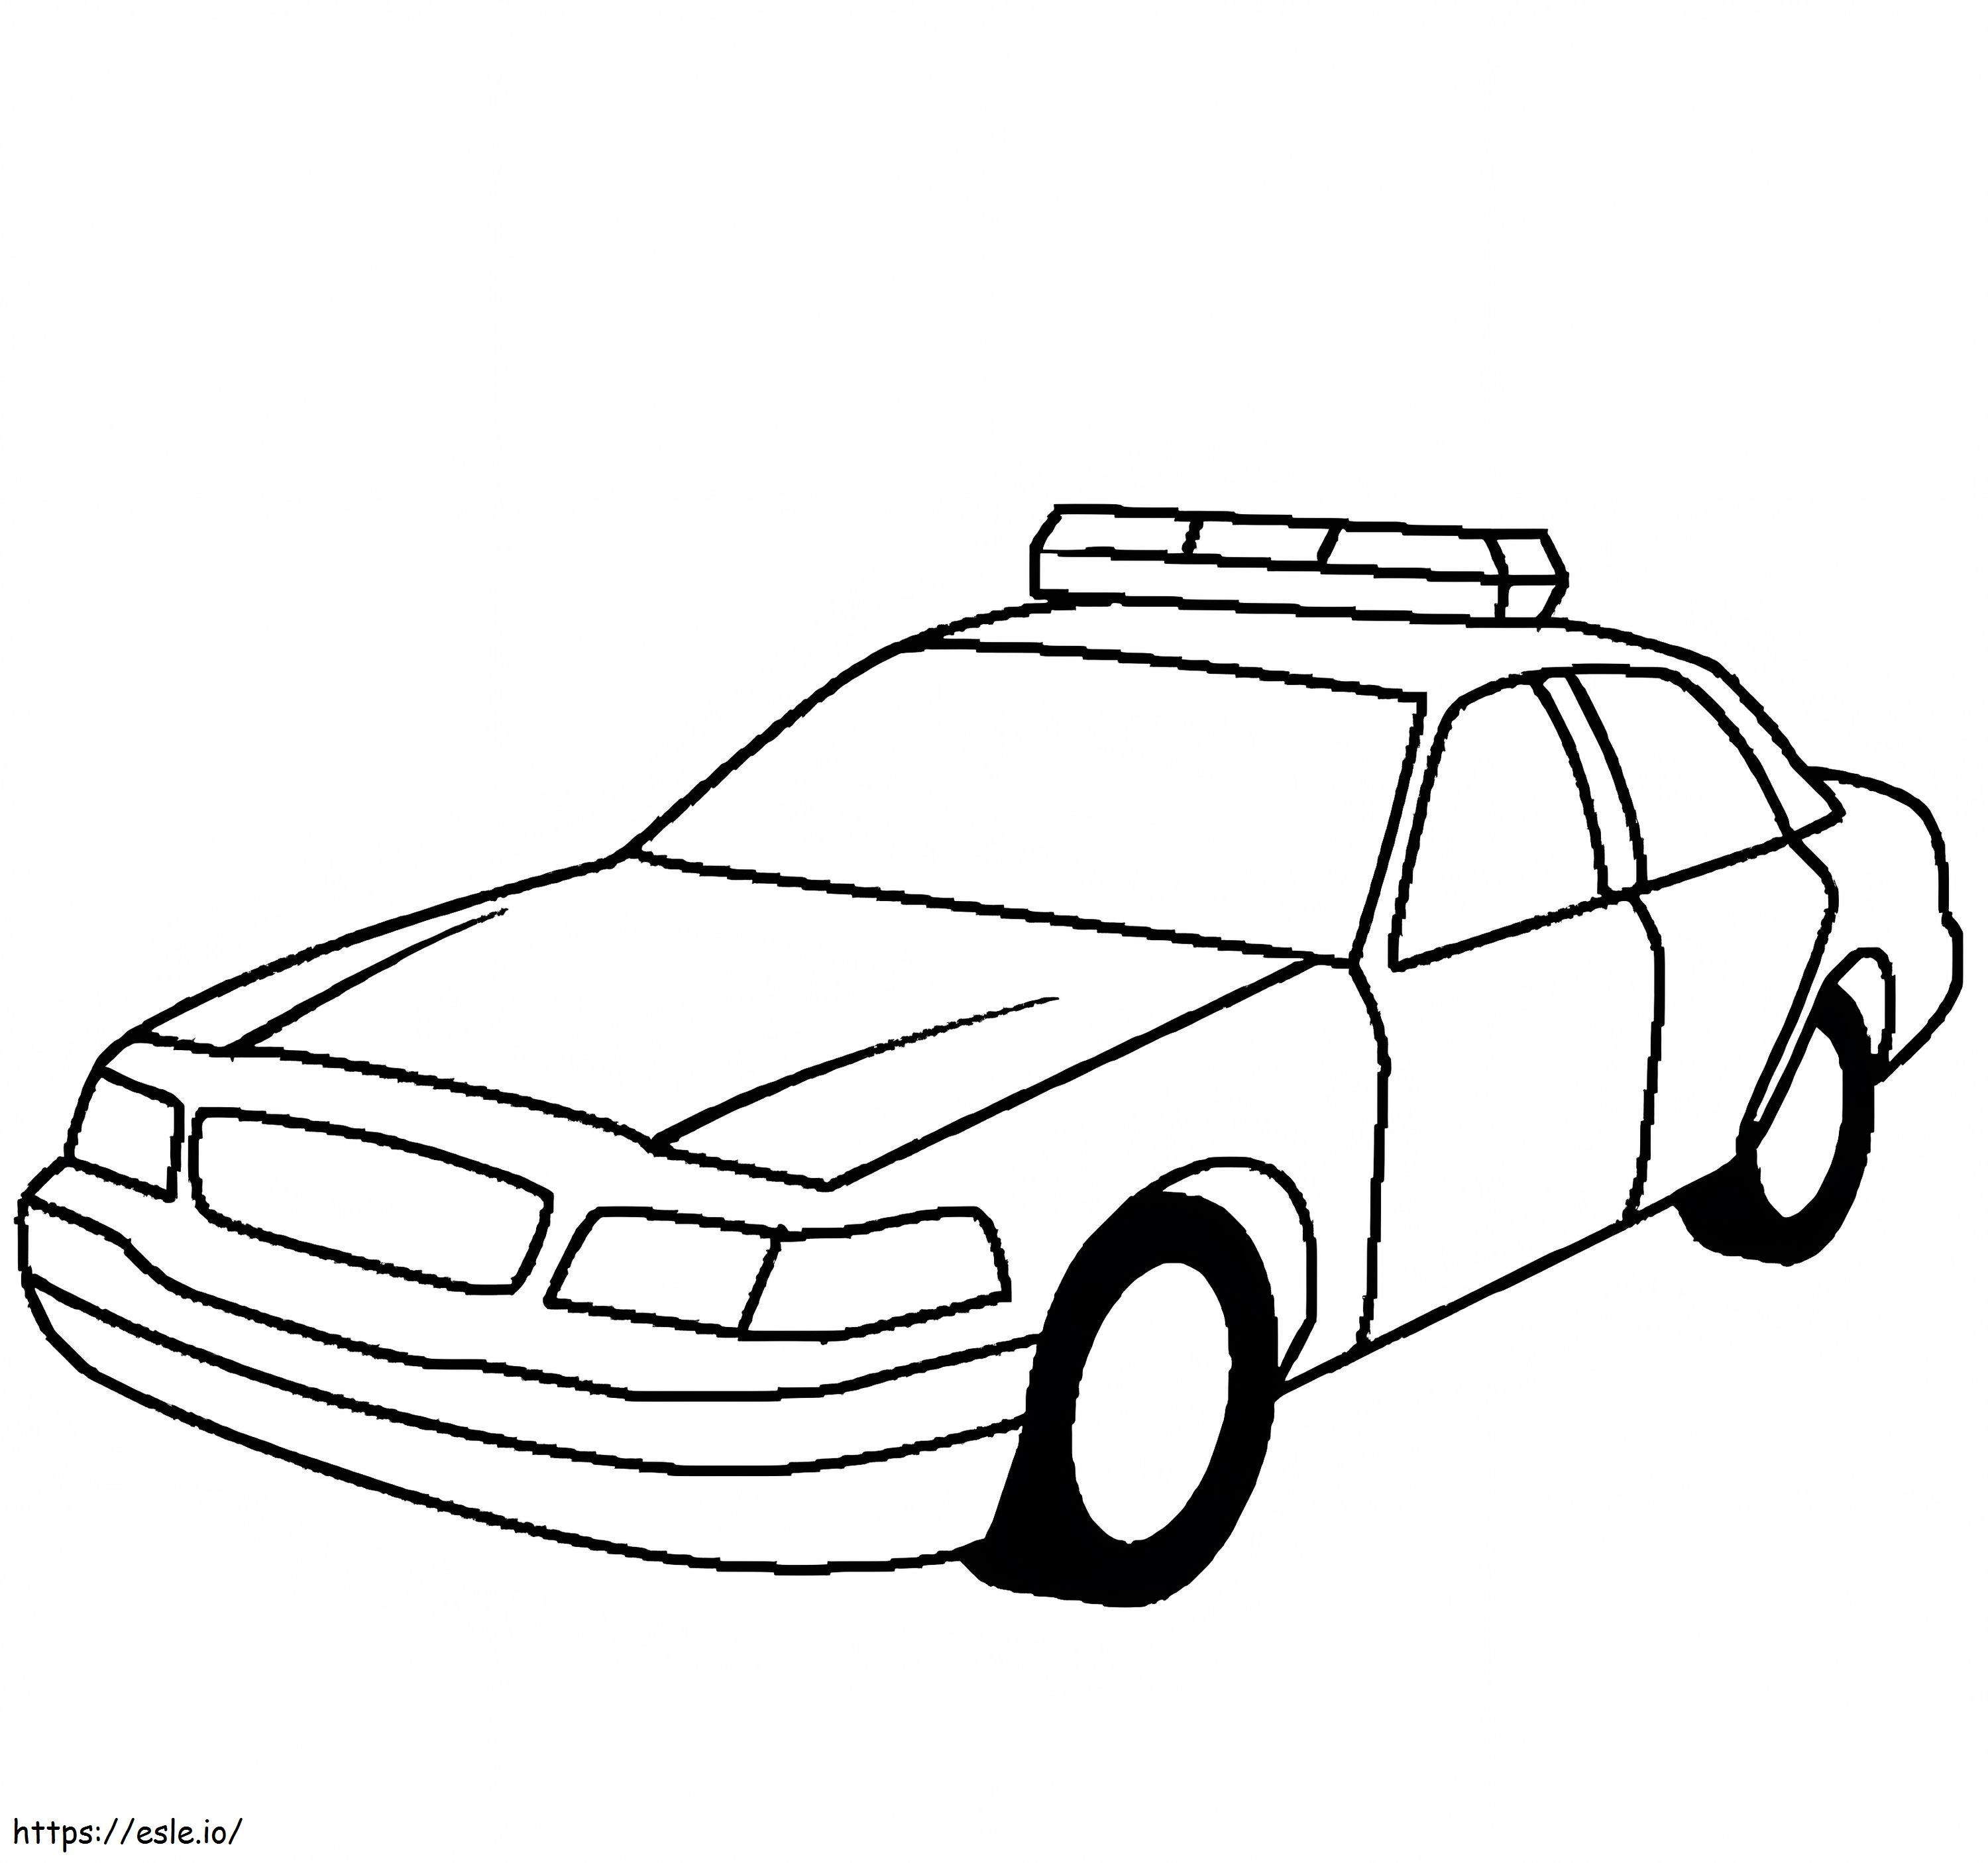 Basic Police Car coloring page